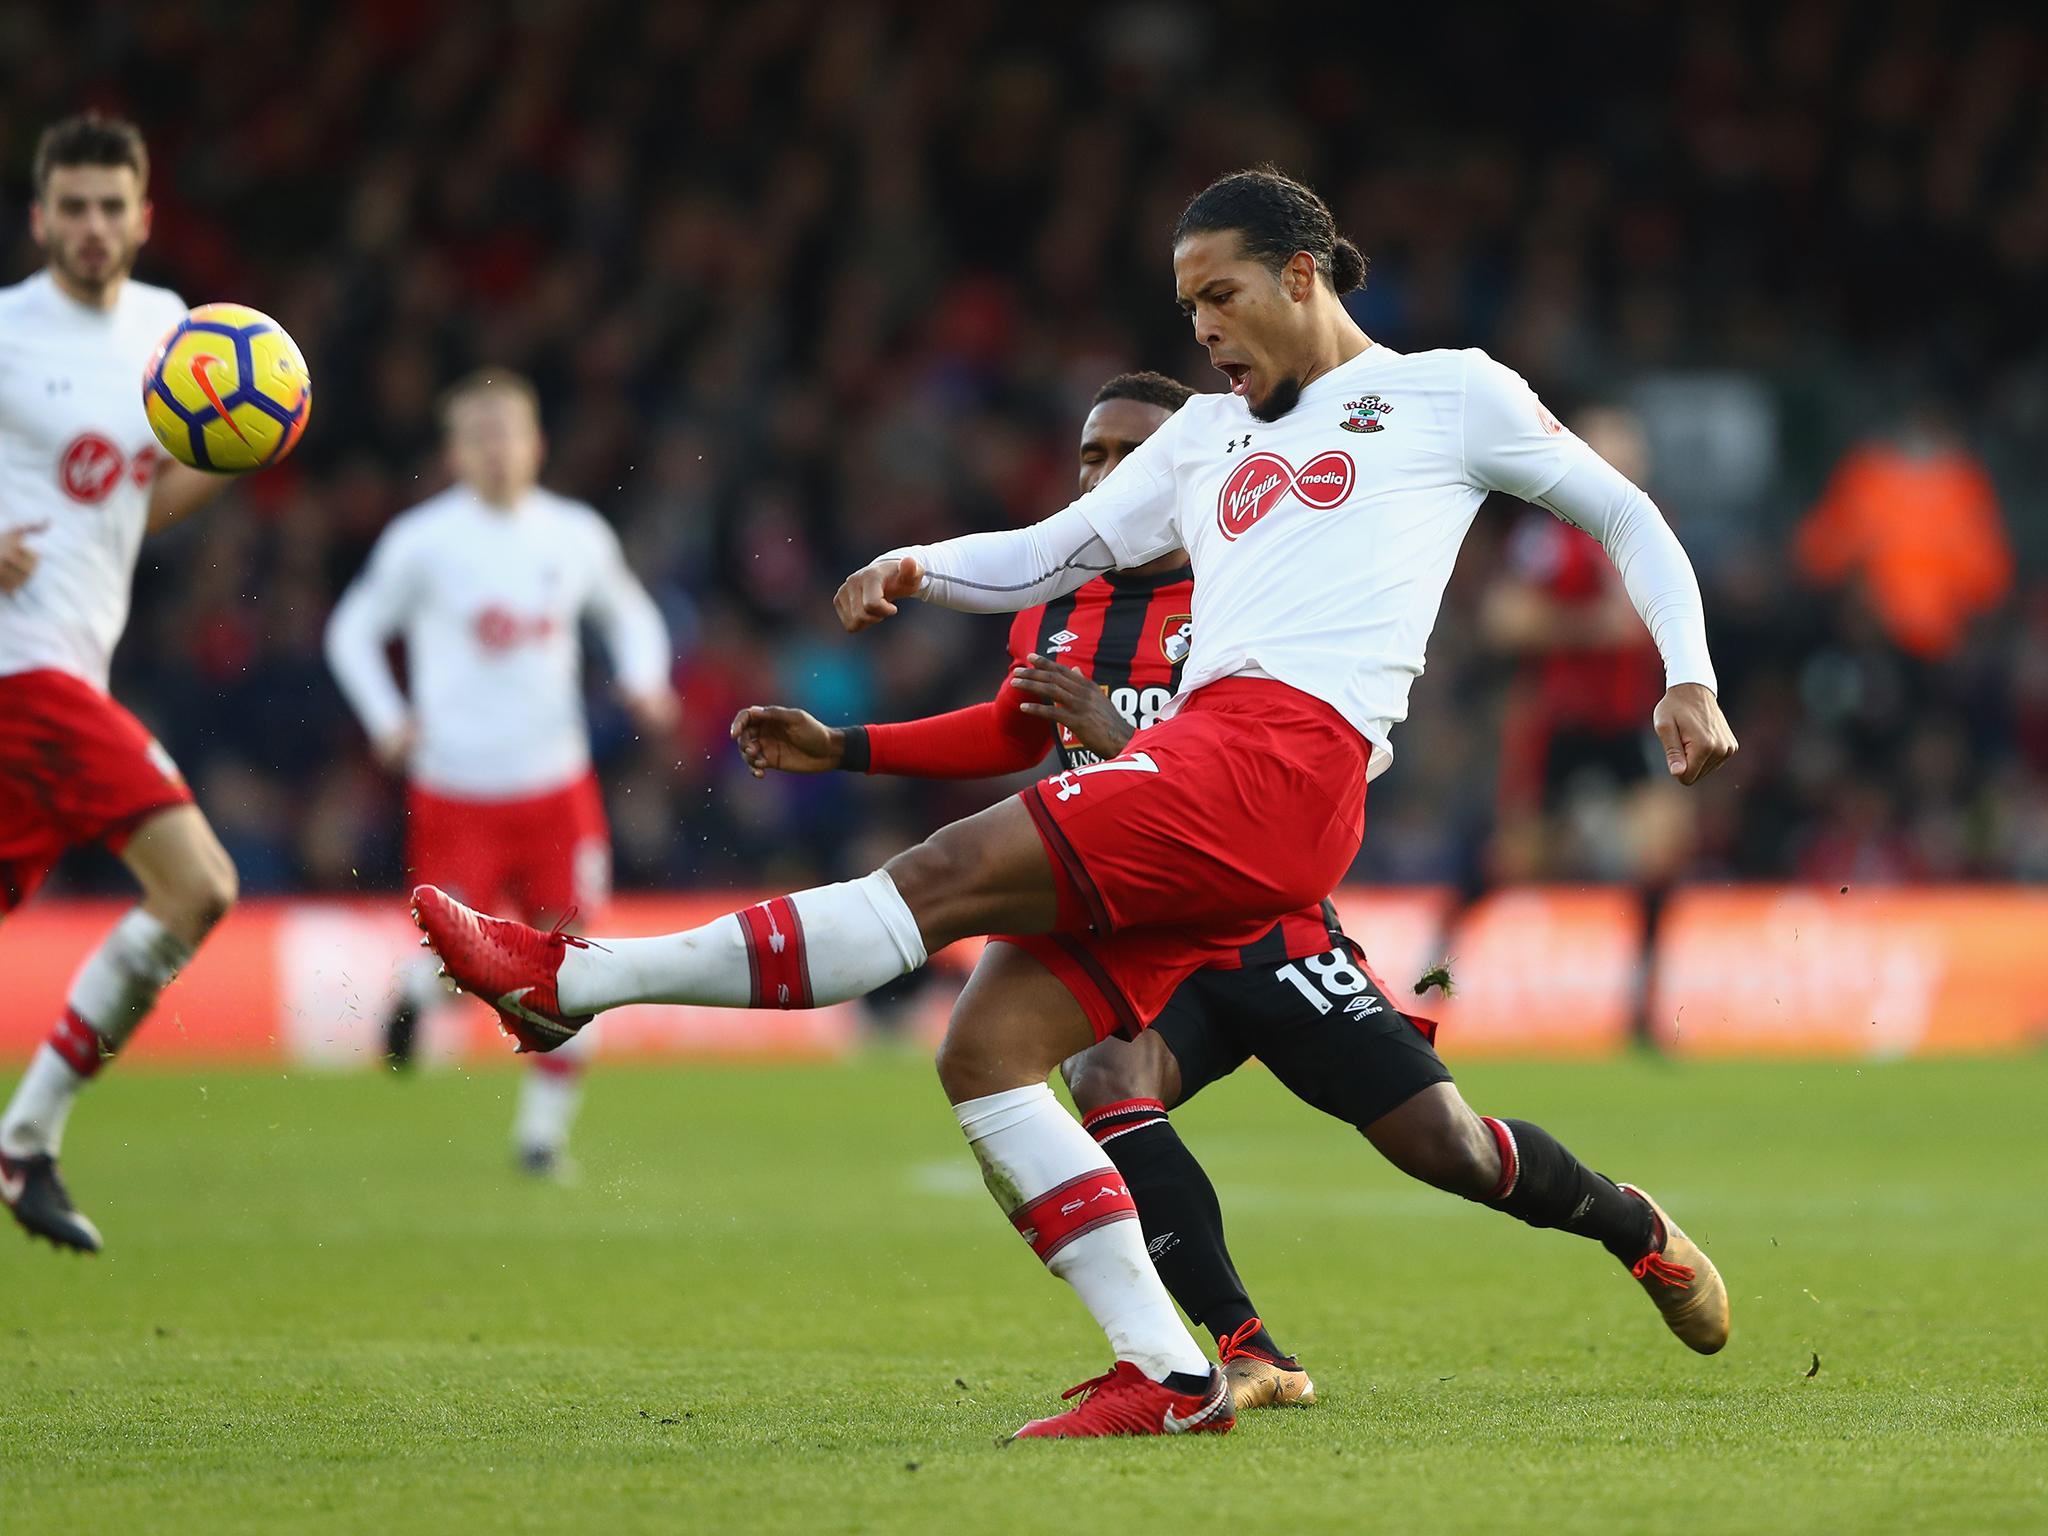 Virgil van Dijk is closing in on a Southampton exit after being left out of the squad for the game against Tottenham